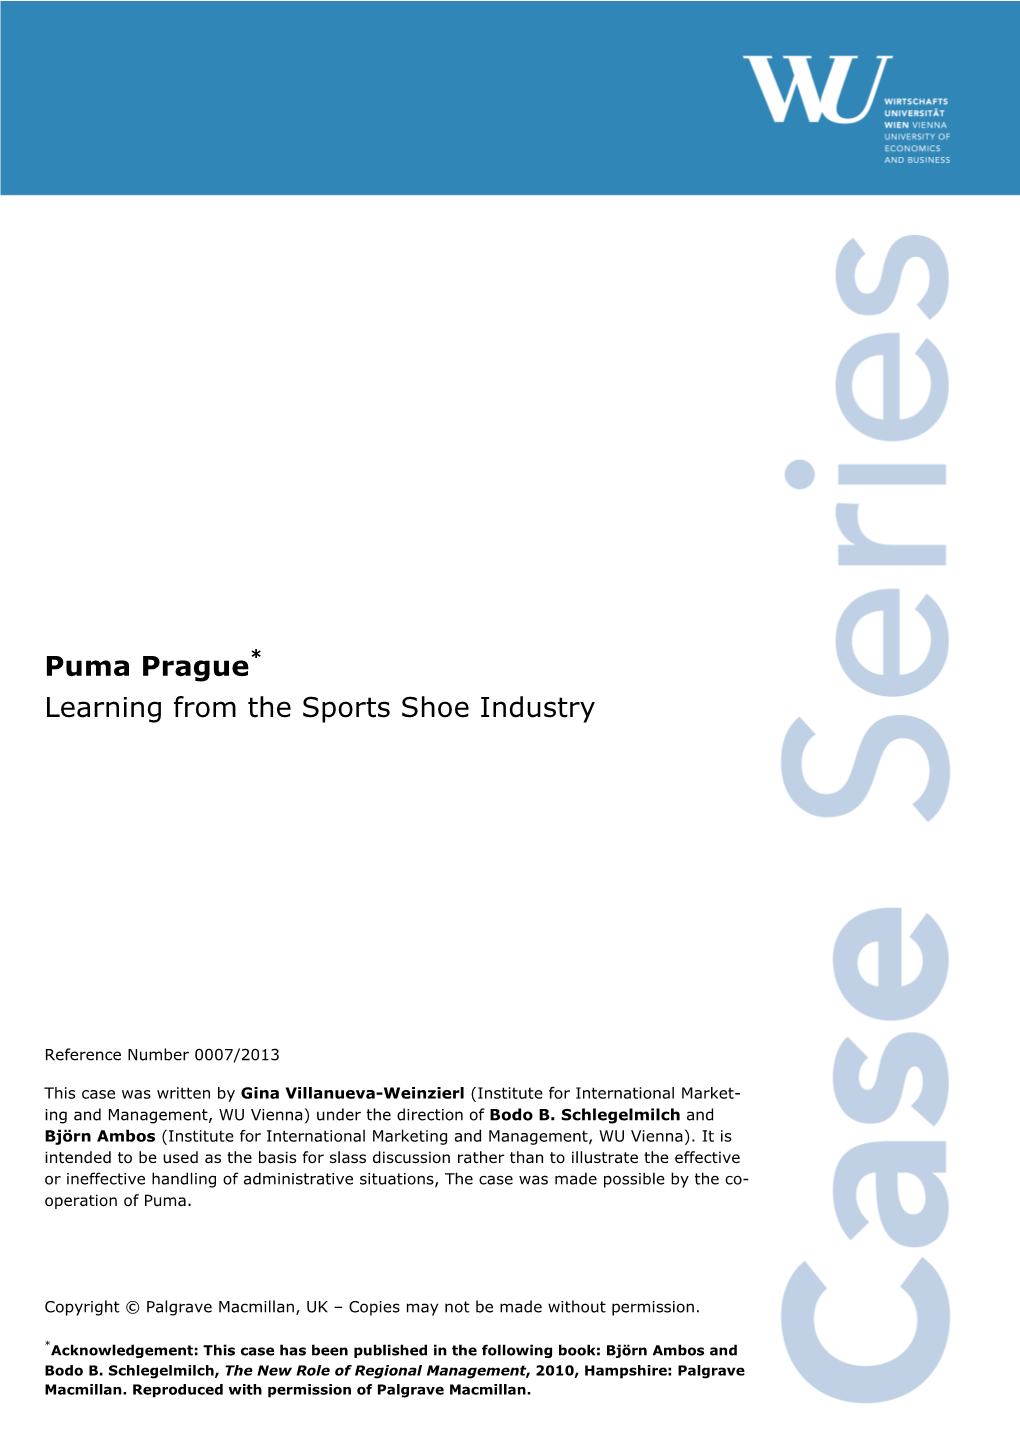 Puma Prague Learning from the Sports Shoe Industry